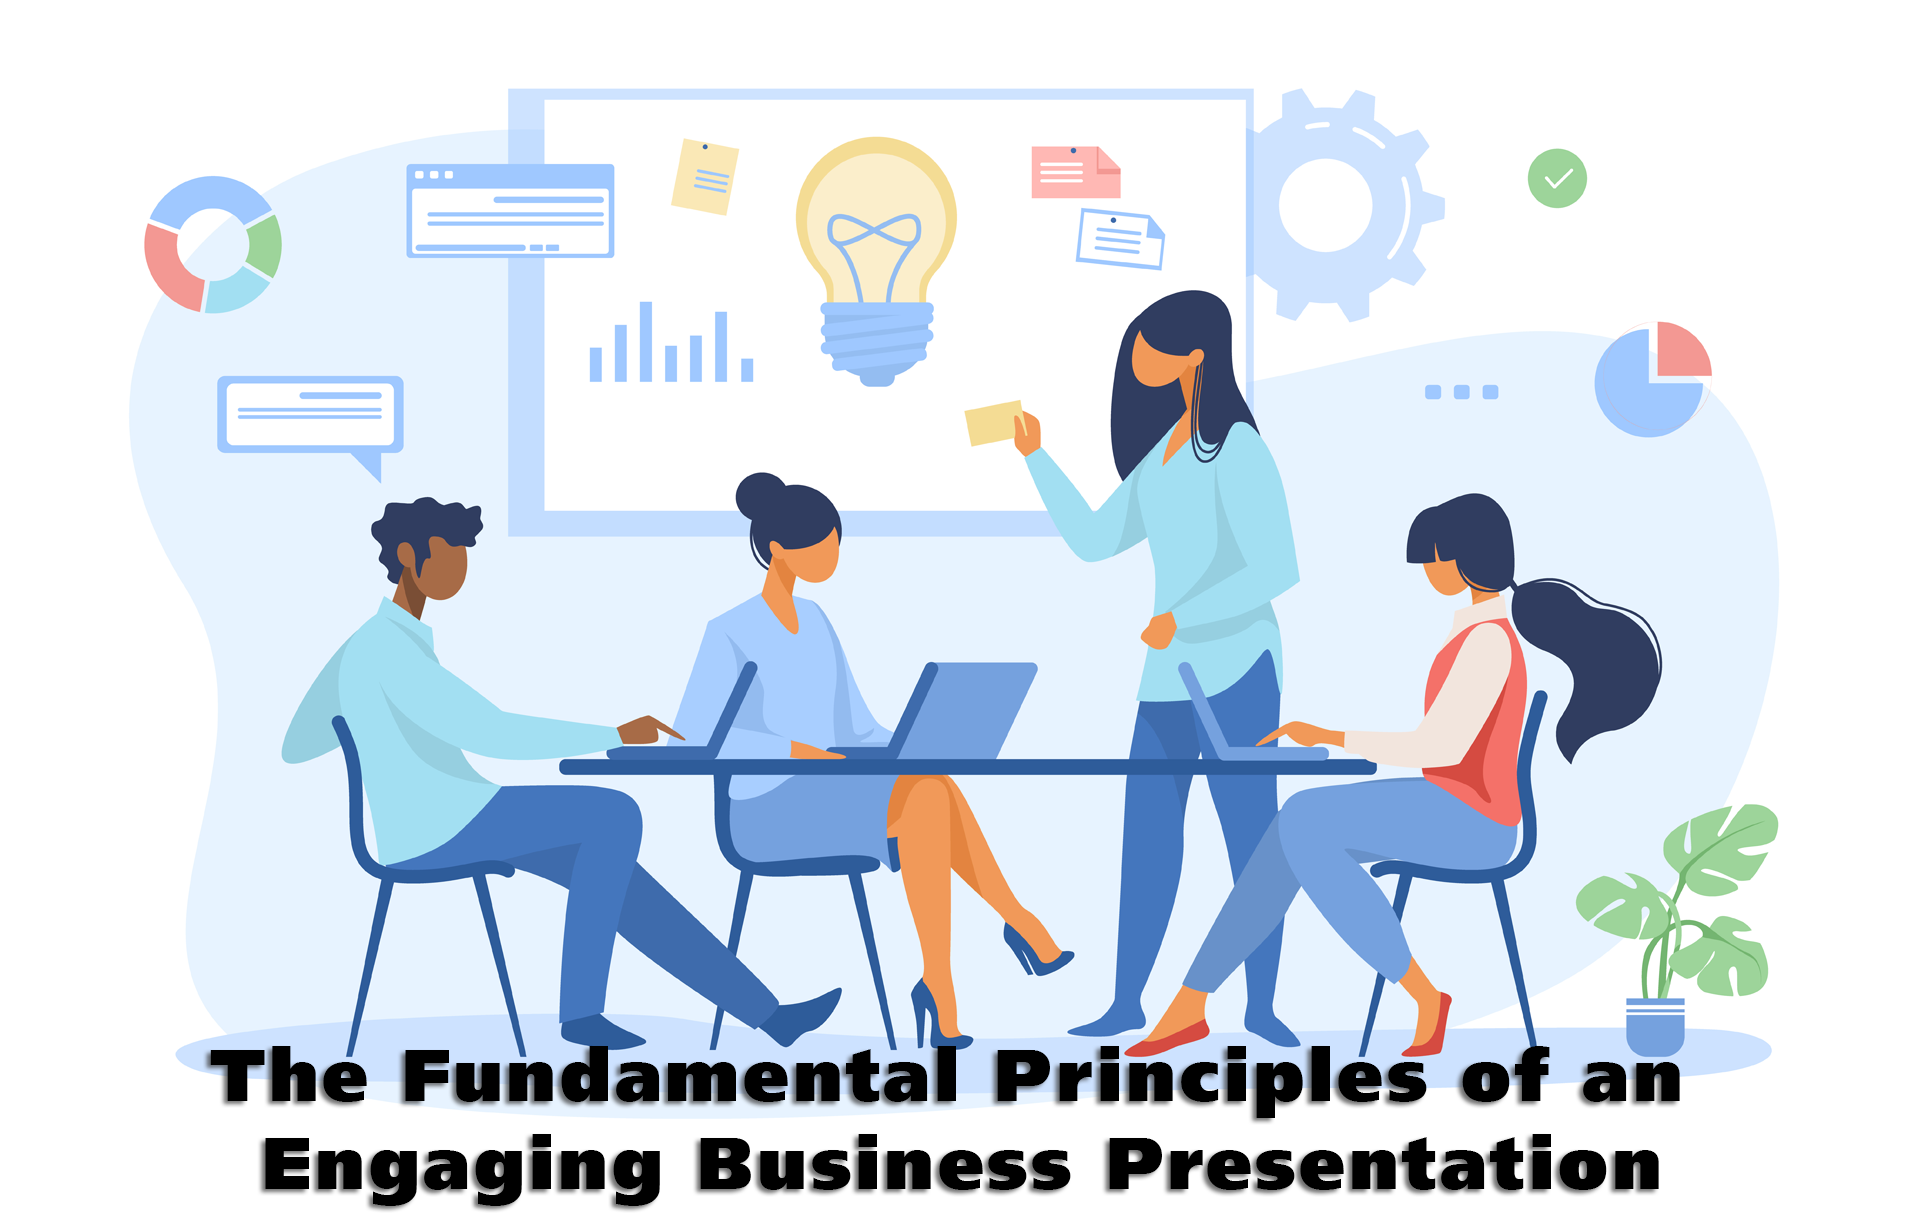 The Fundamental Principles of an Engaging Business Presentation